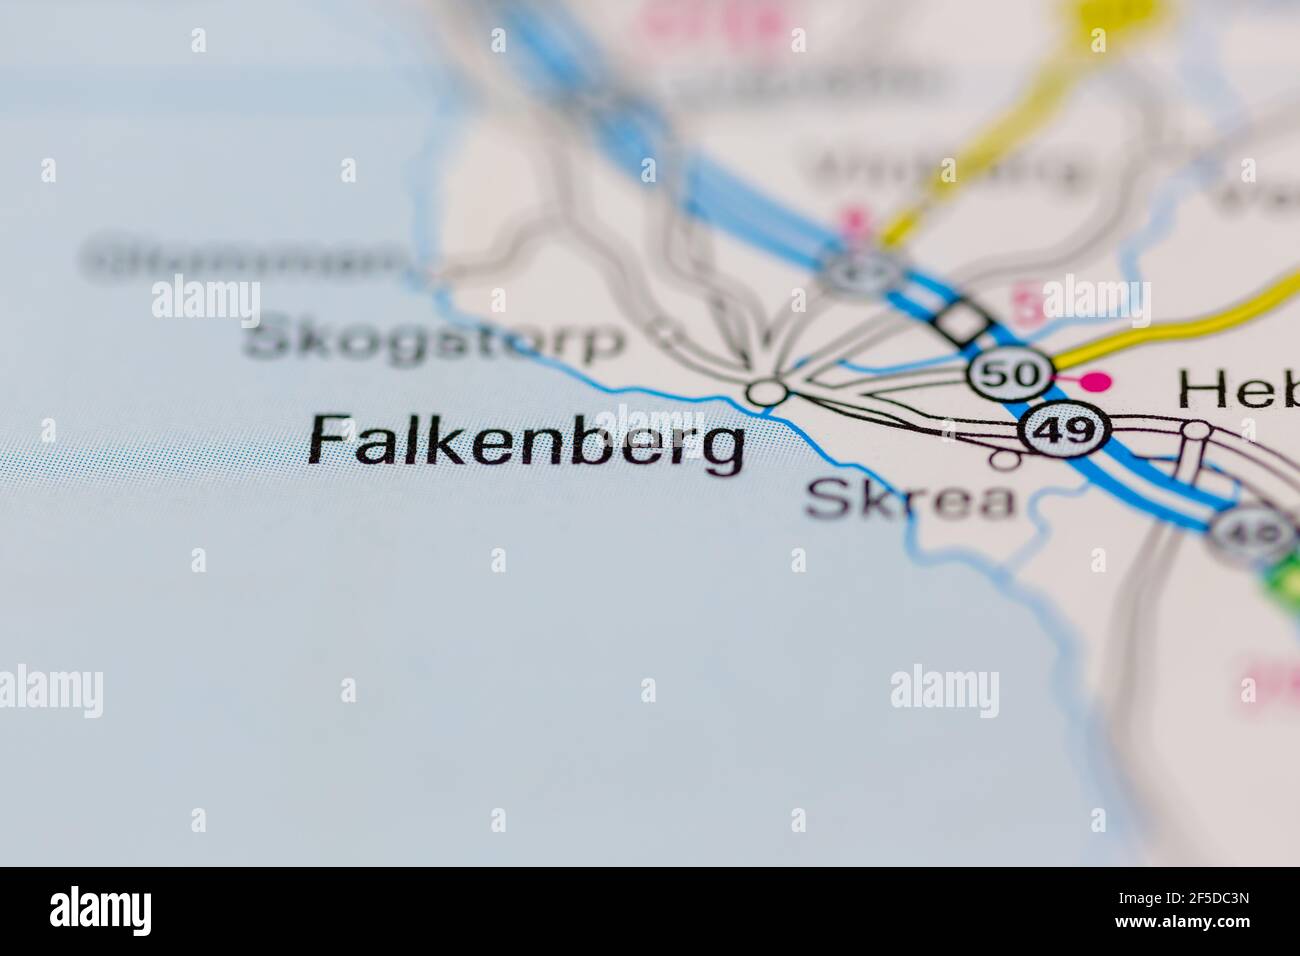 Falkenberg and surrounding areas Shown on a Geography map or road map Stock Photo